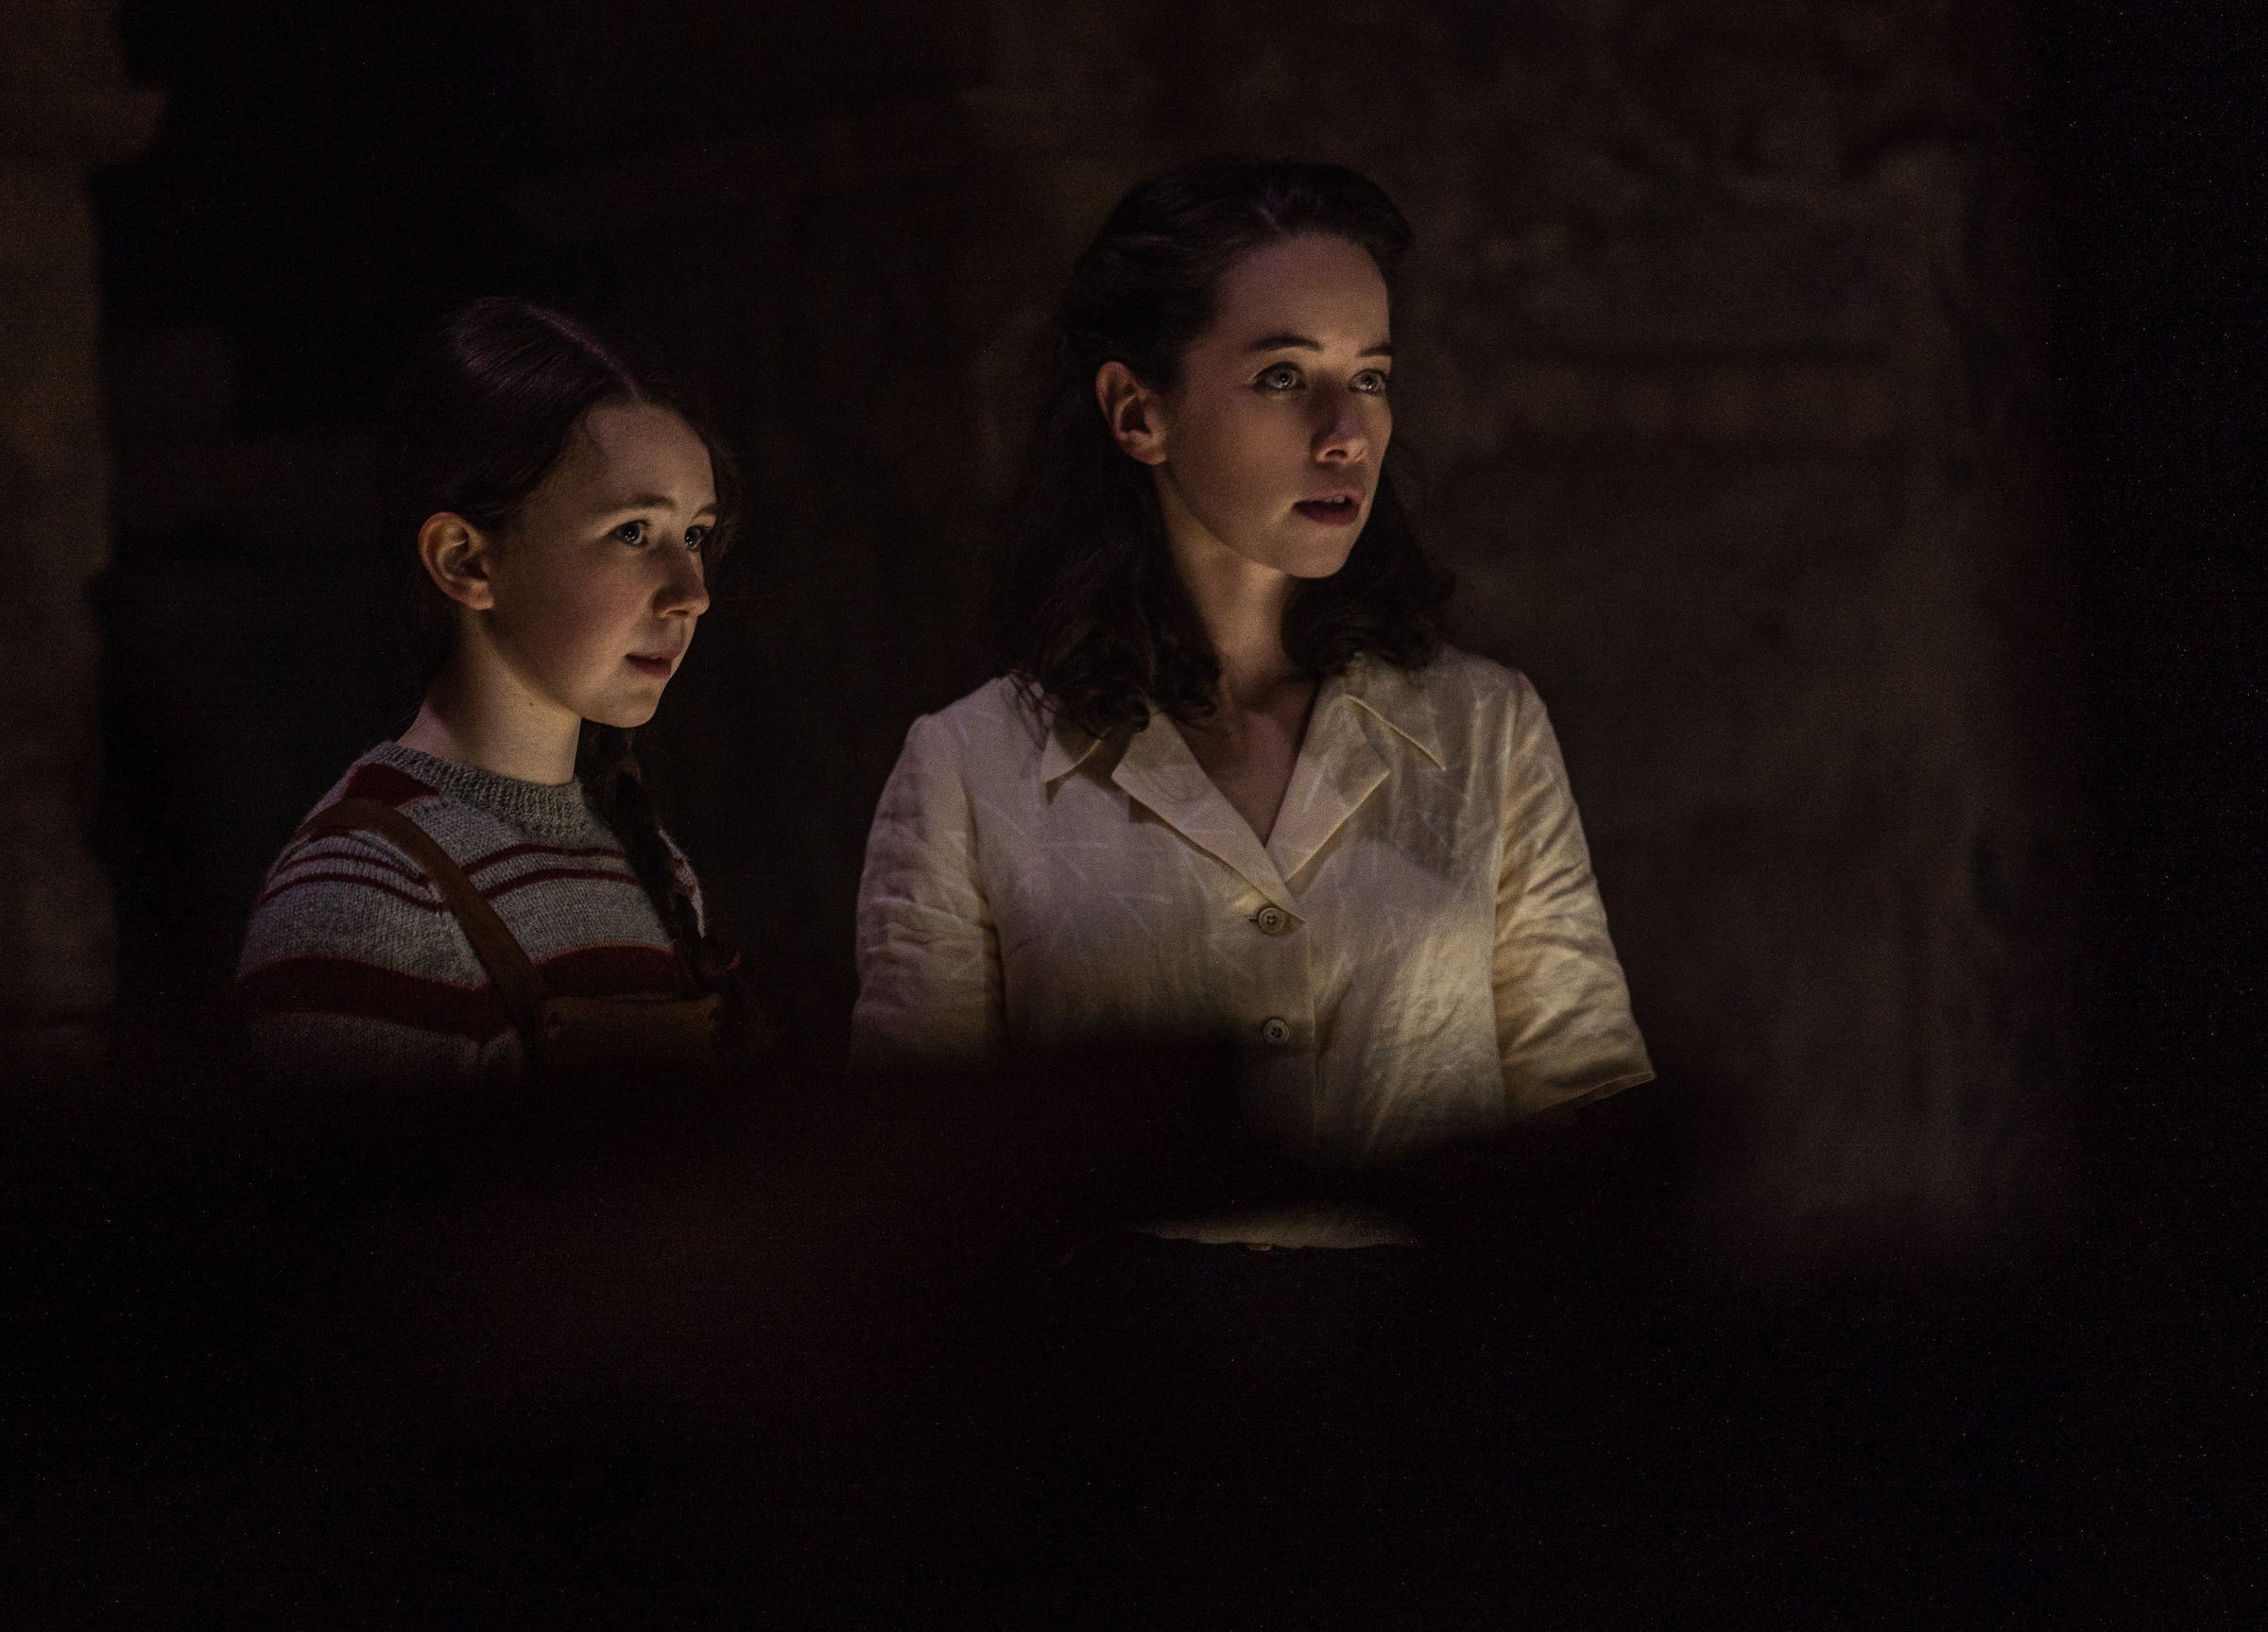 Kately Rose Downey as Sophie and Anna Popplewell as Kate (Courtesy of Warner Bros. Pictures)